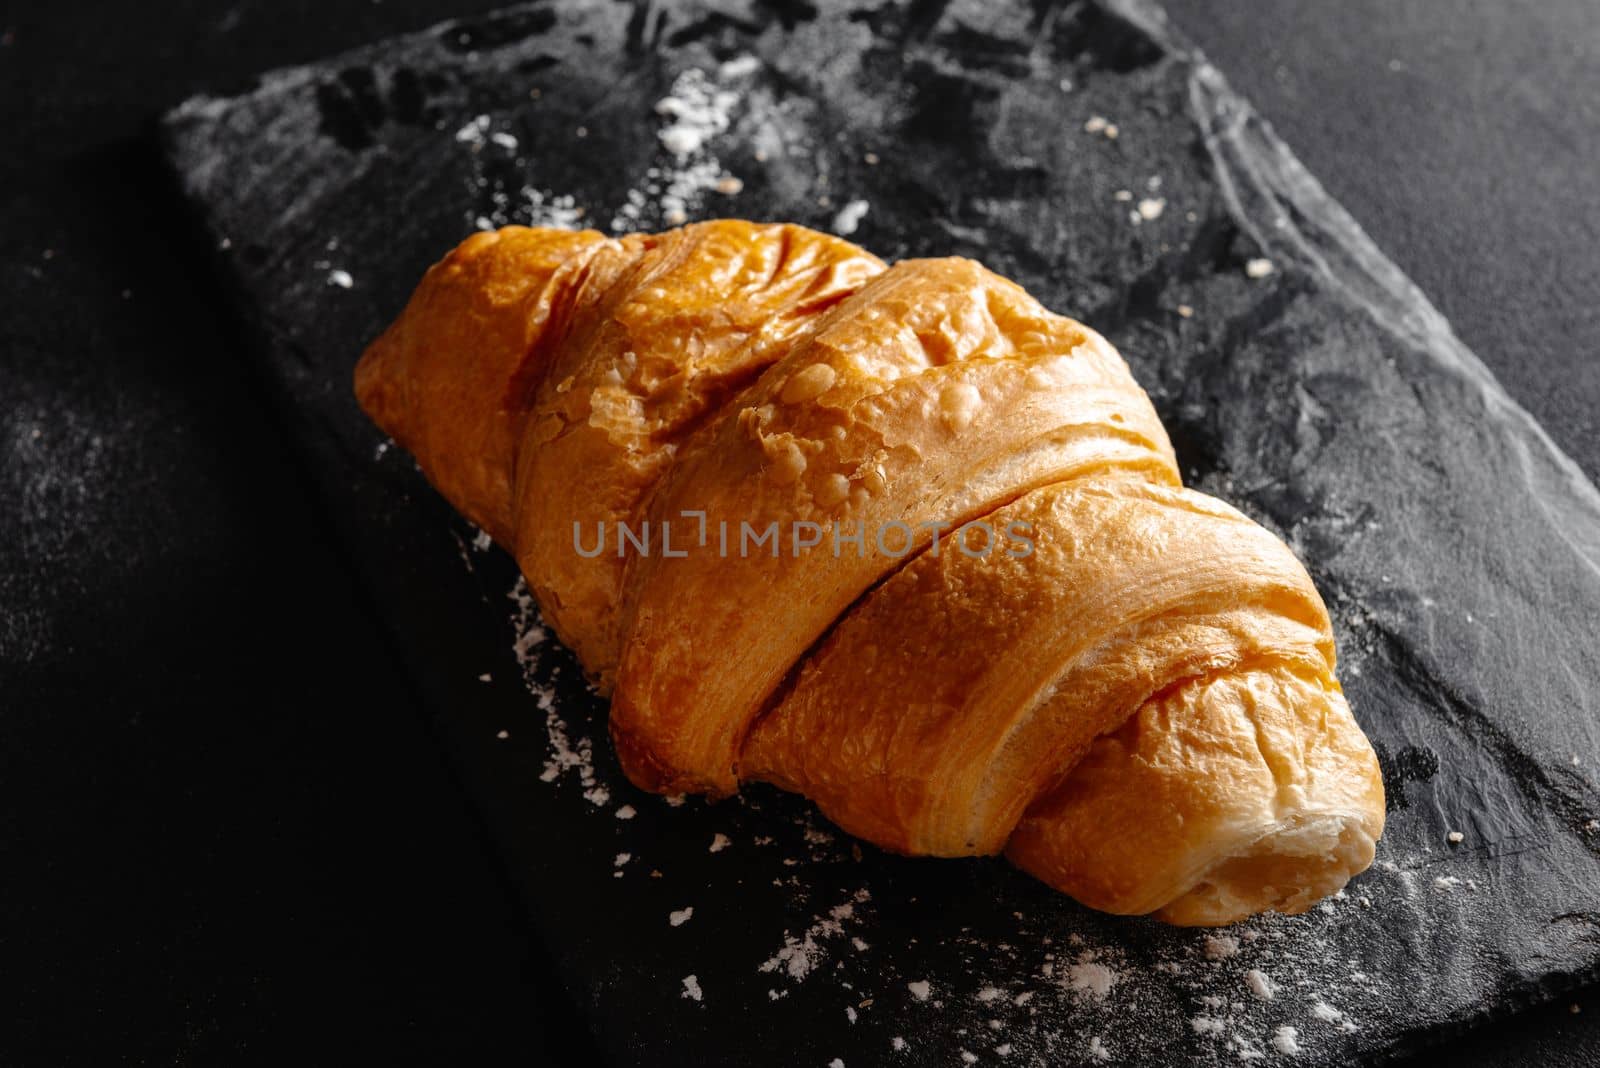 Large croissant on black background. Fresh and delicious French pastries, bakery concept, close-up image by gulyaevstudio